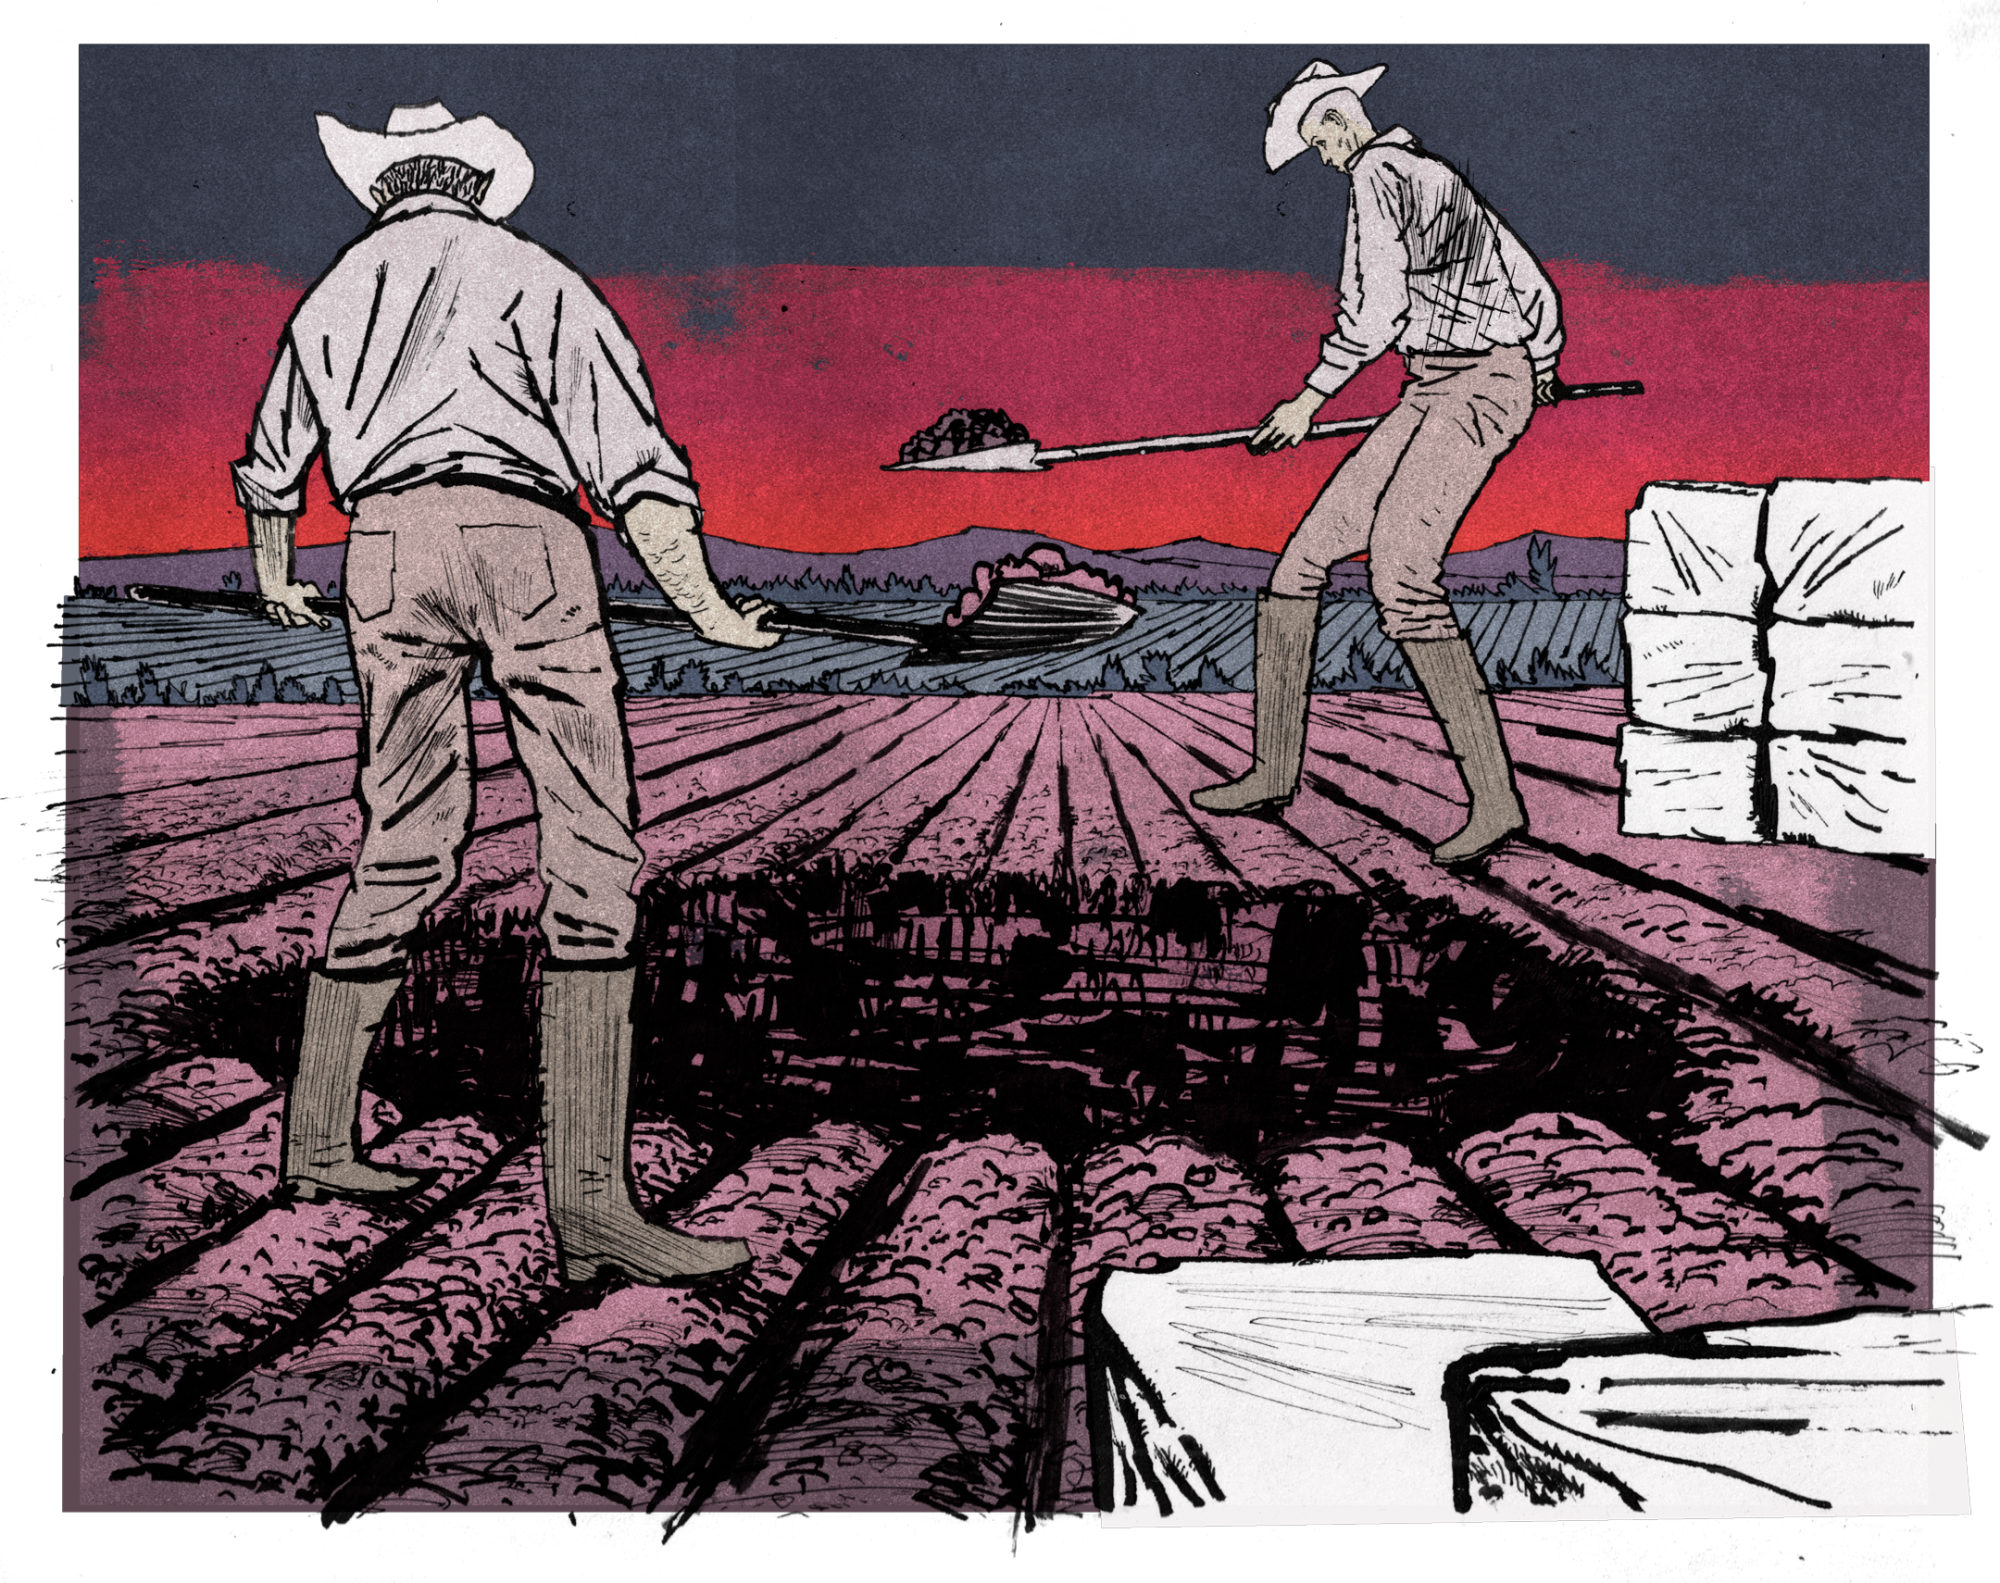 An illustration of two men digging a hole to bury drugs.